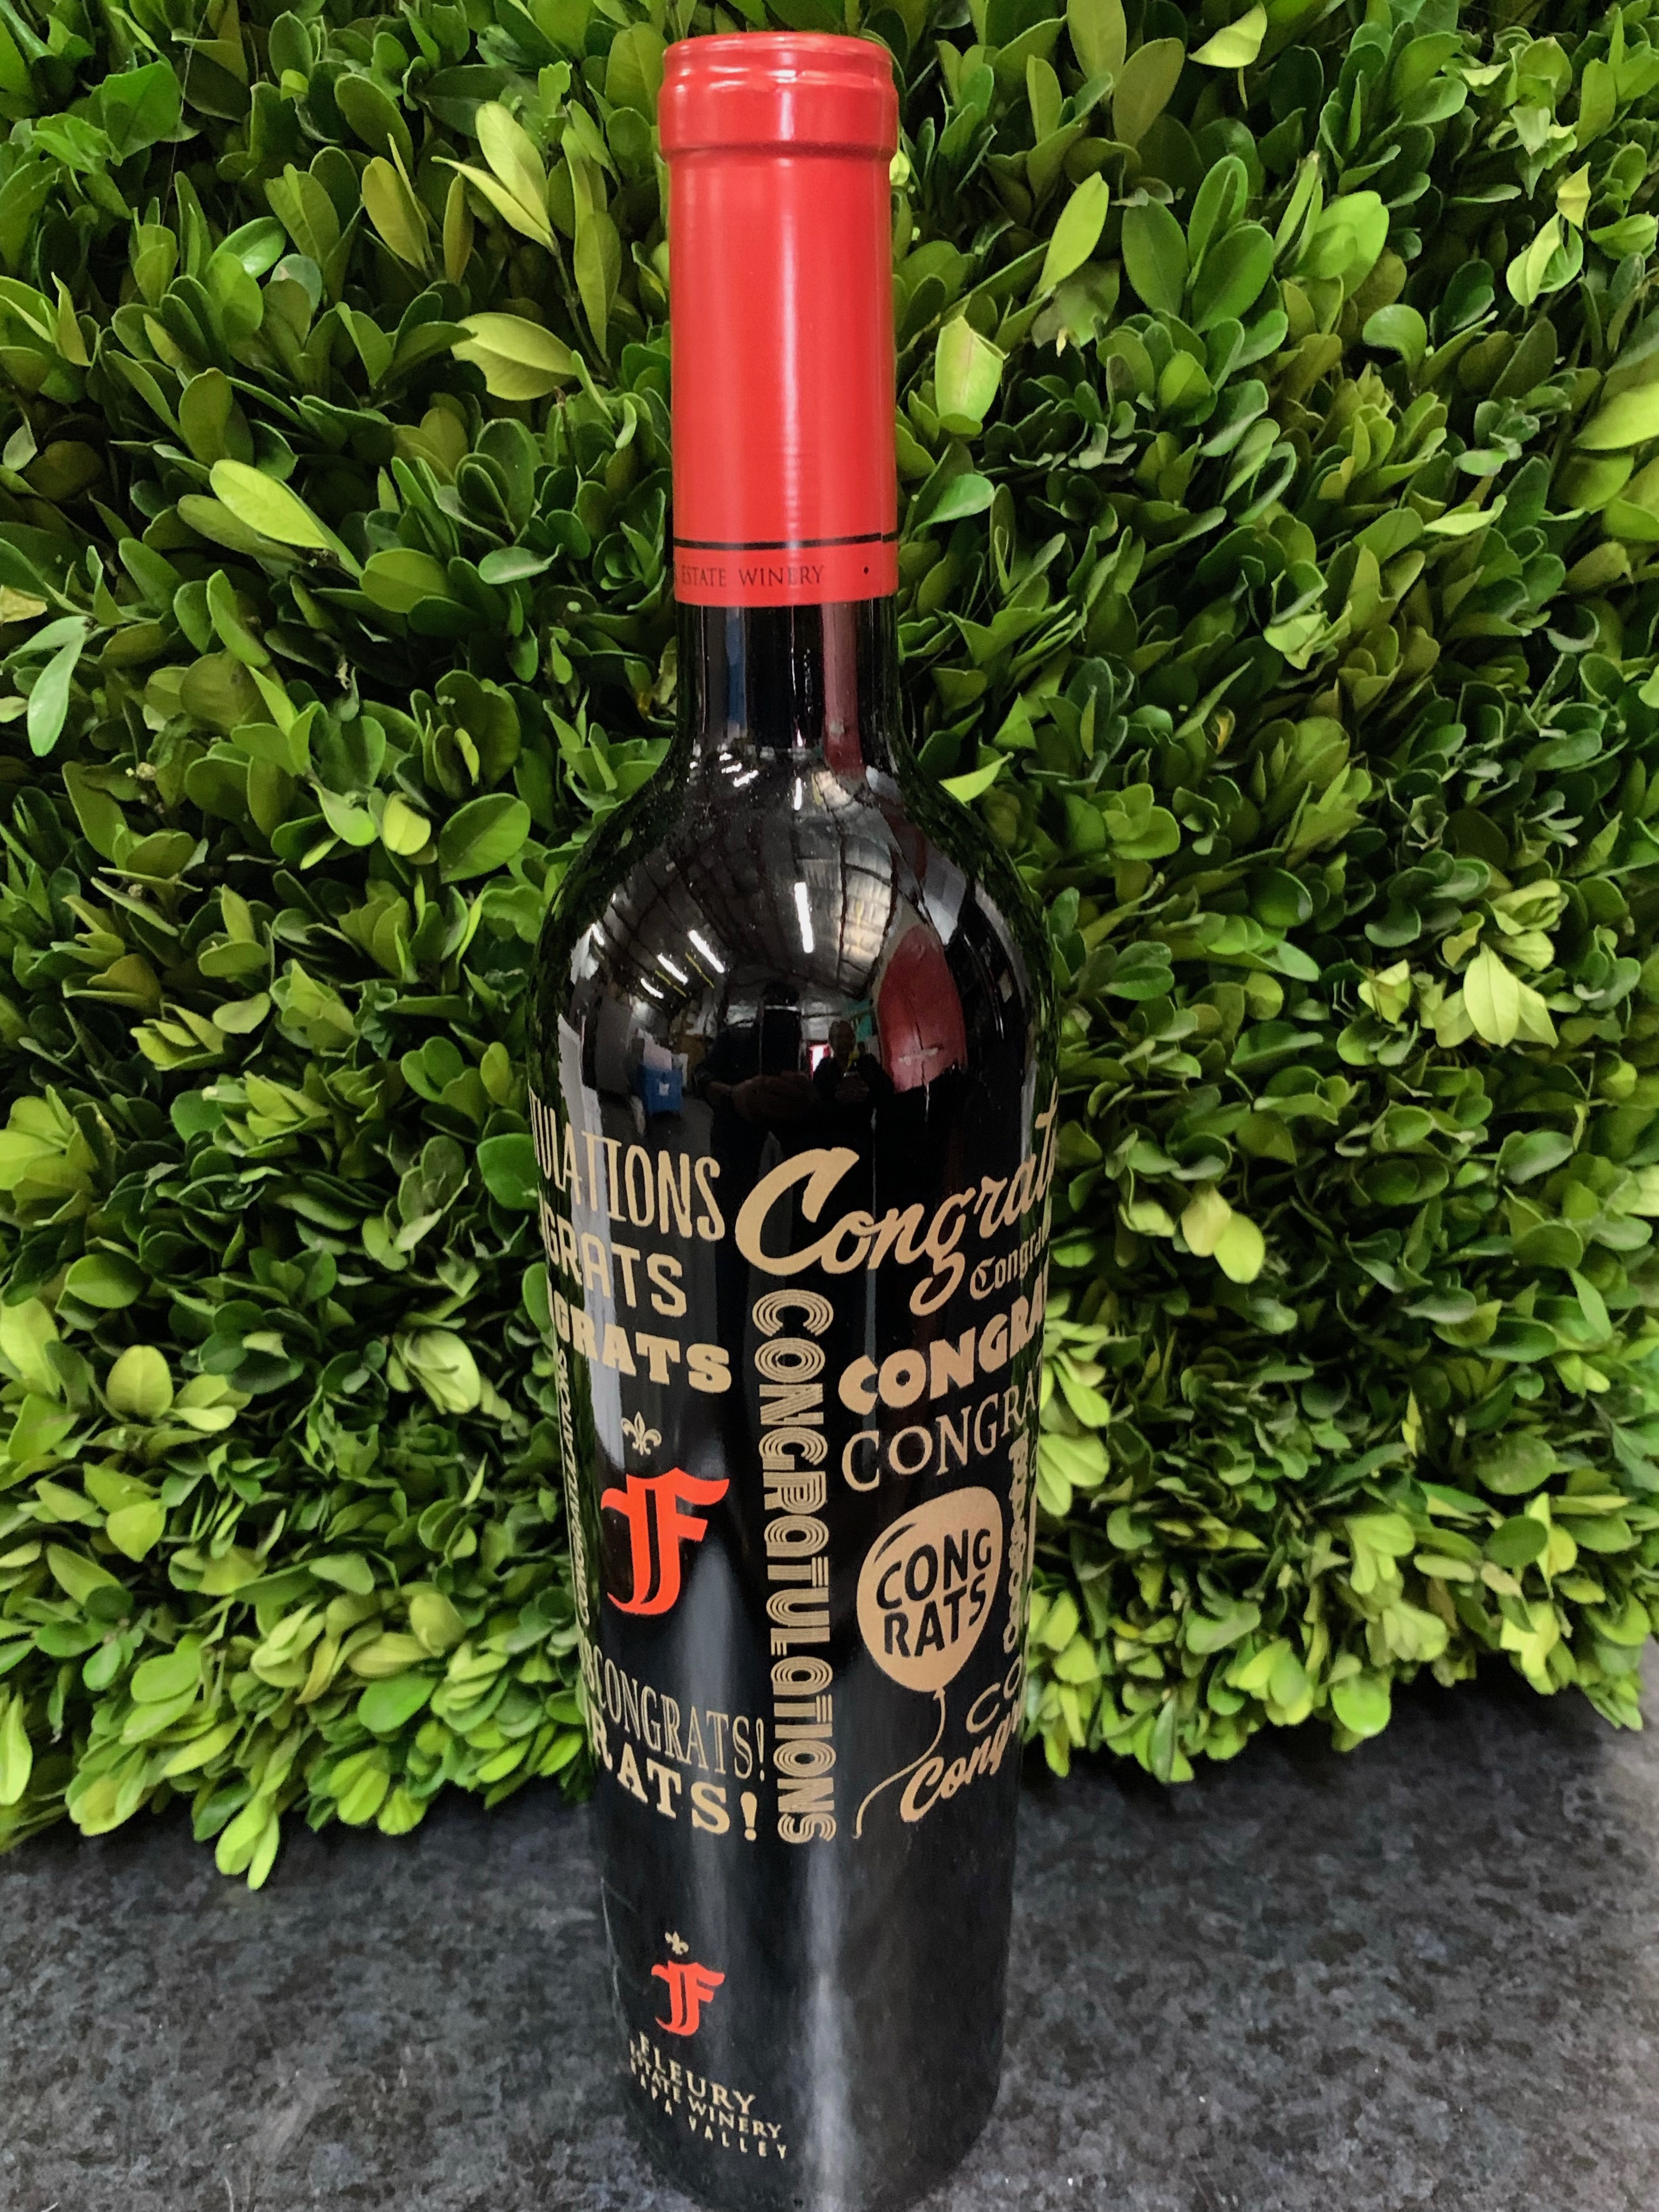 Product Image for 2019 "Congratulations", Red Wine Blend 